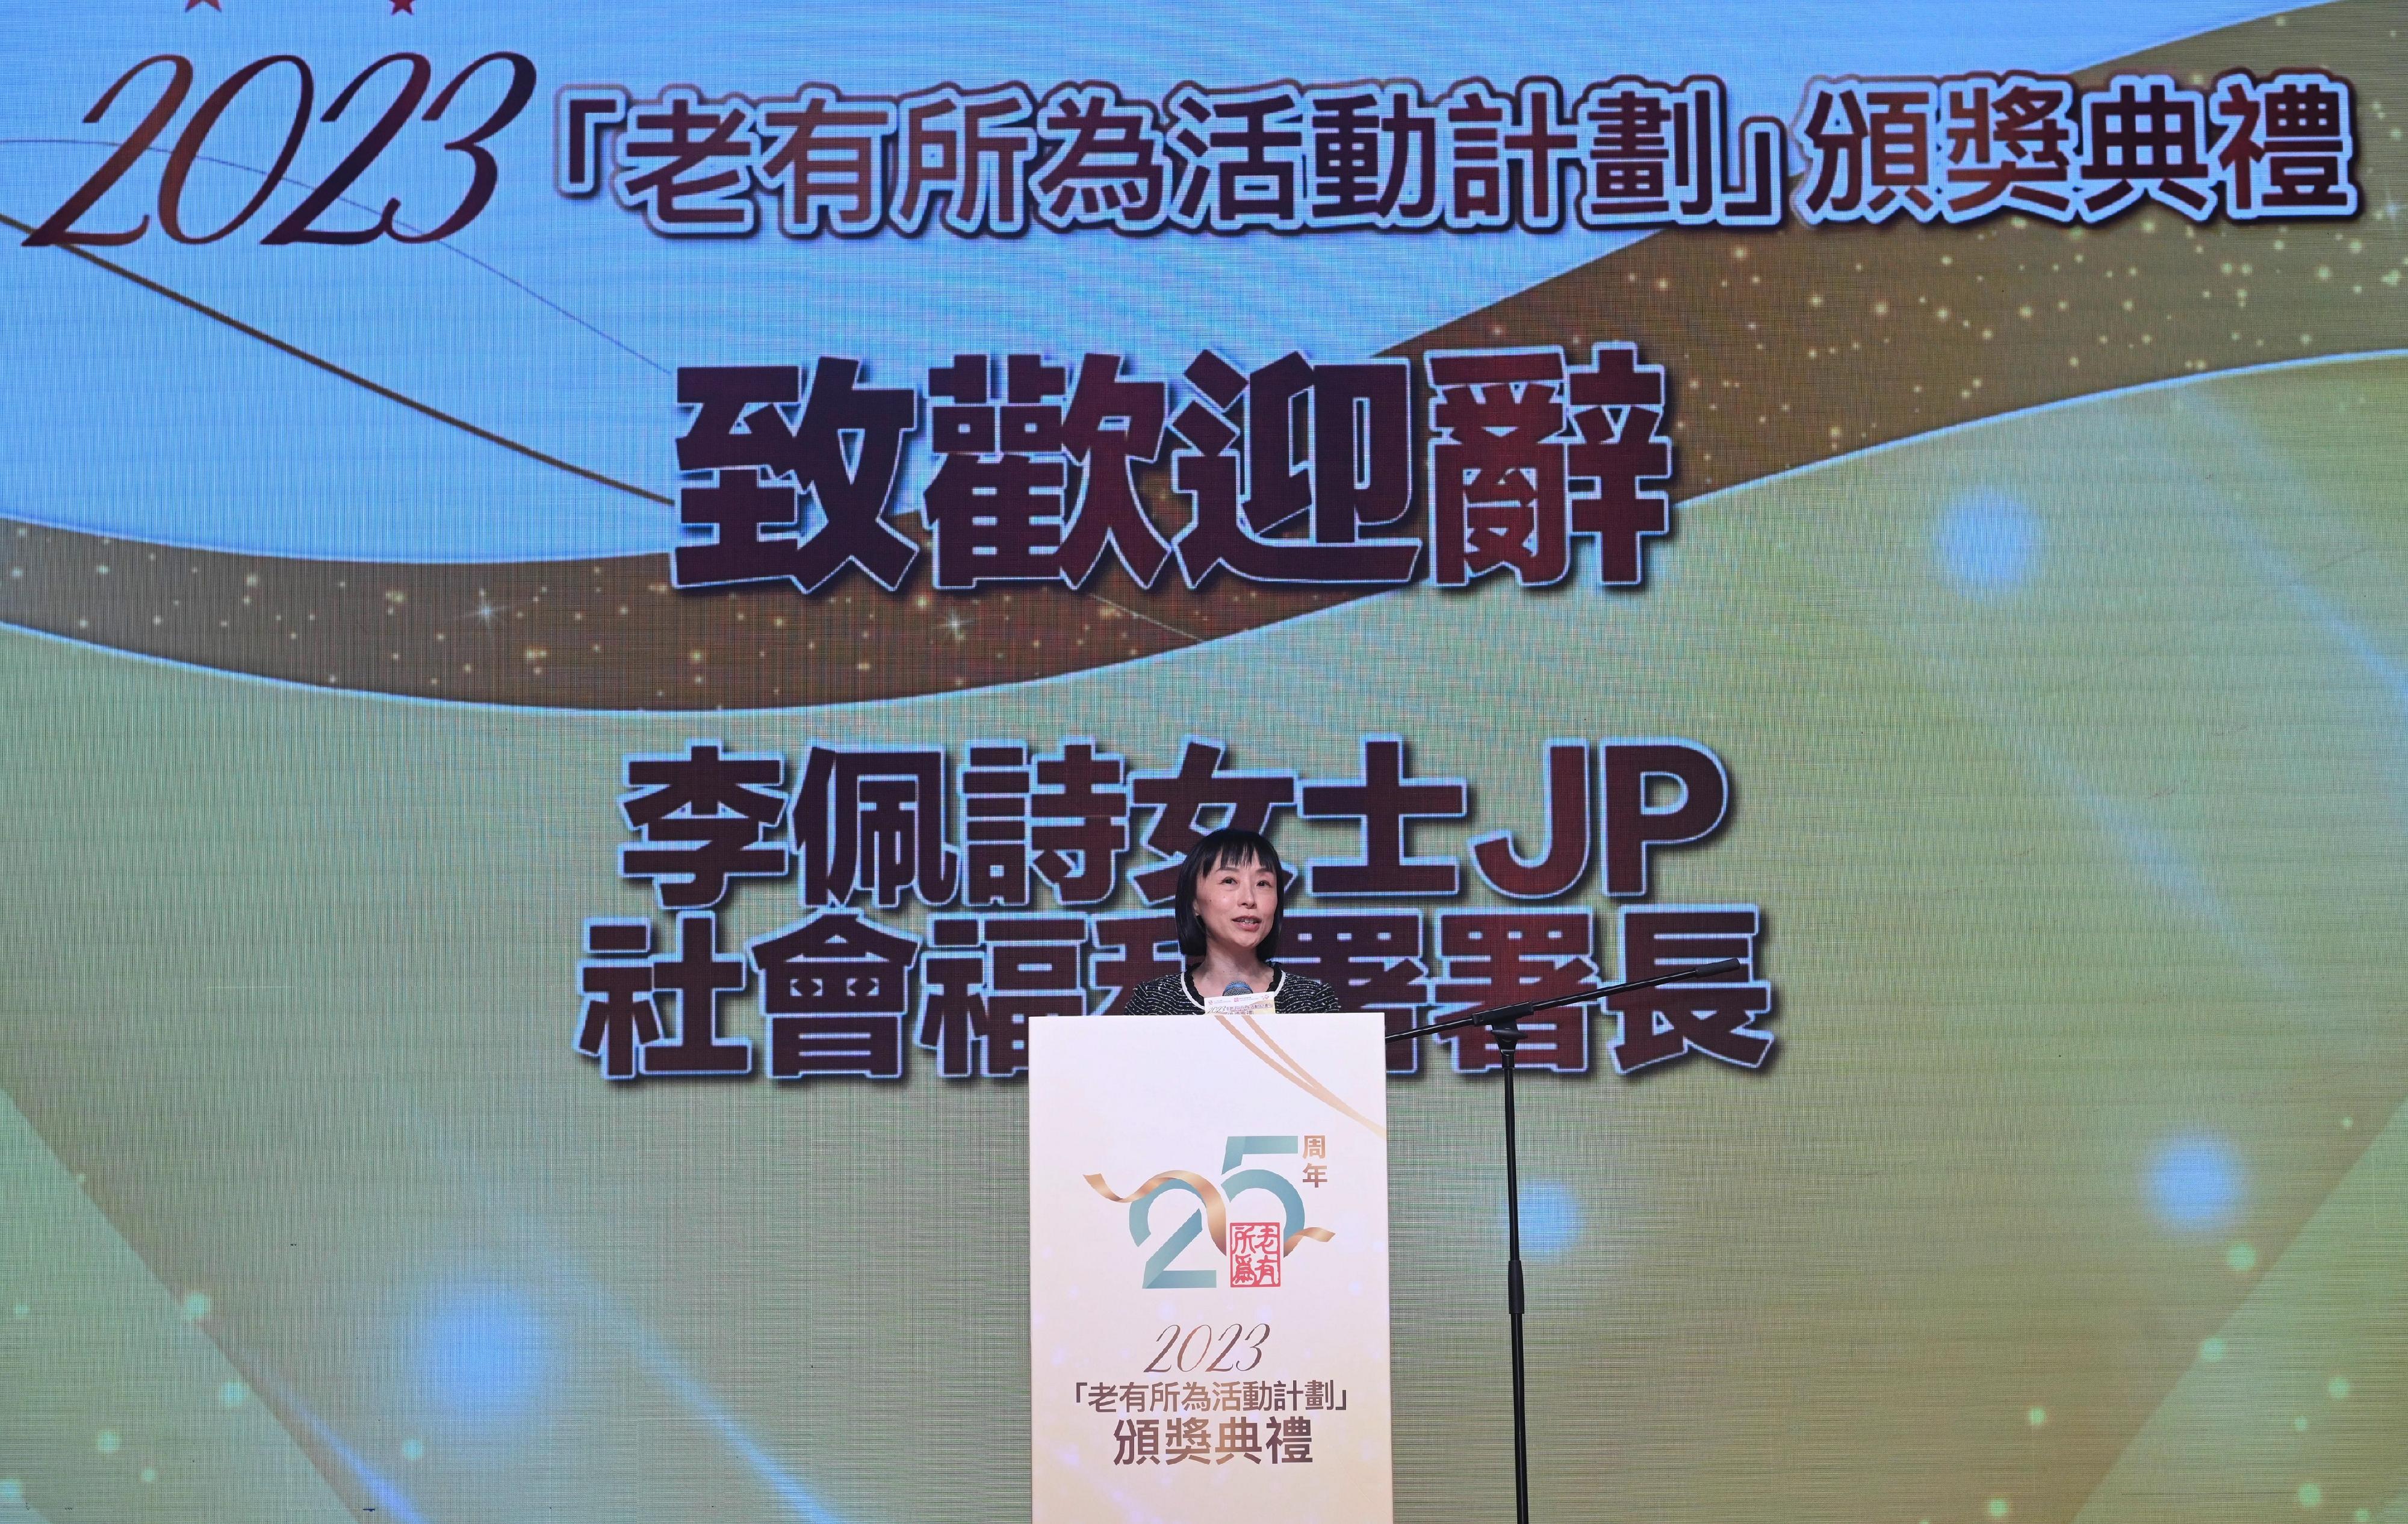 The Social Welfare Department today (November 1) held the 2023 Award Presentation Ceremony of the Opportunities for the Elderly Project. Photo shows the Director of Social Welfare, Miss Charmaine Lee, delivering a welcoming speech at the ceremony.